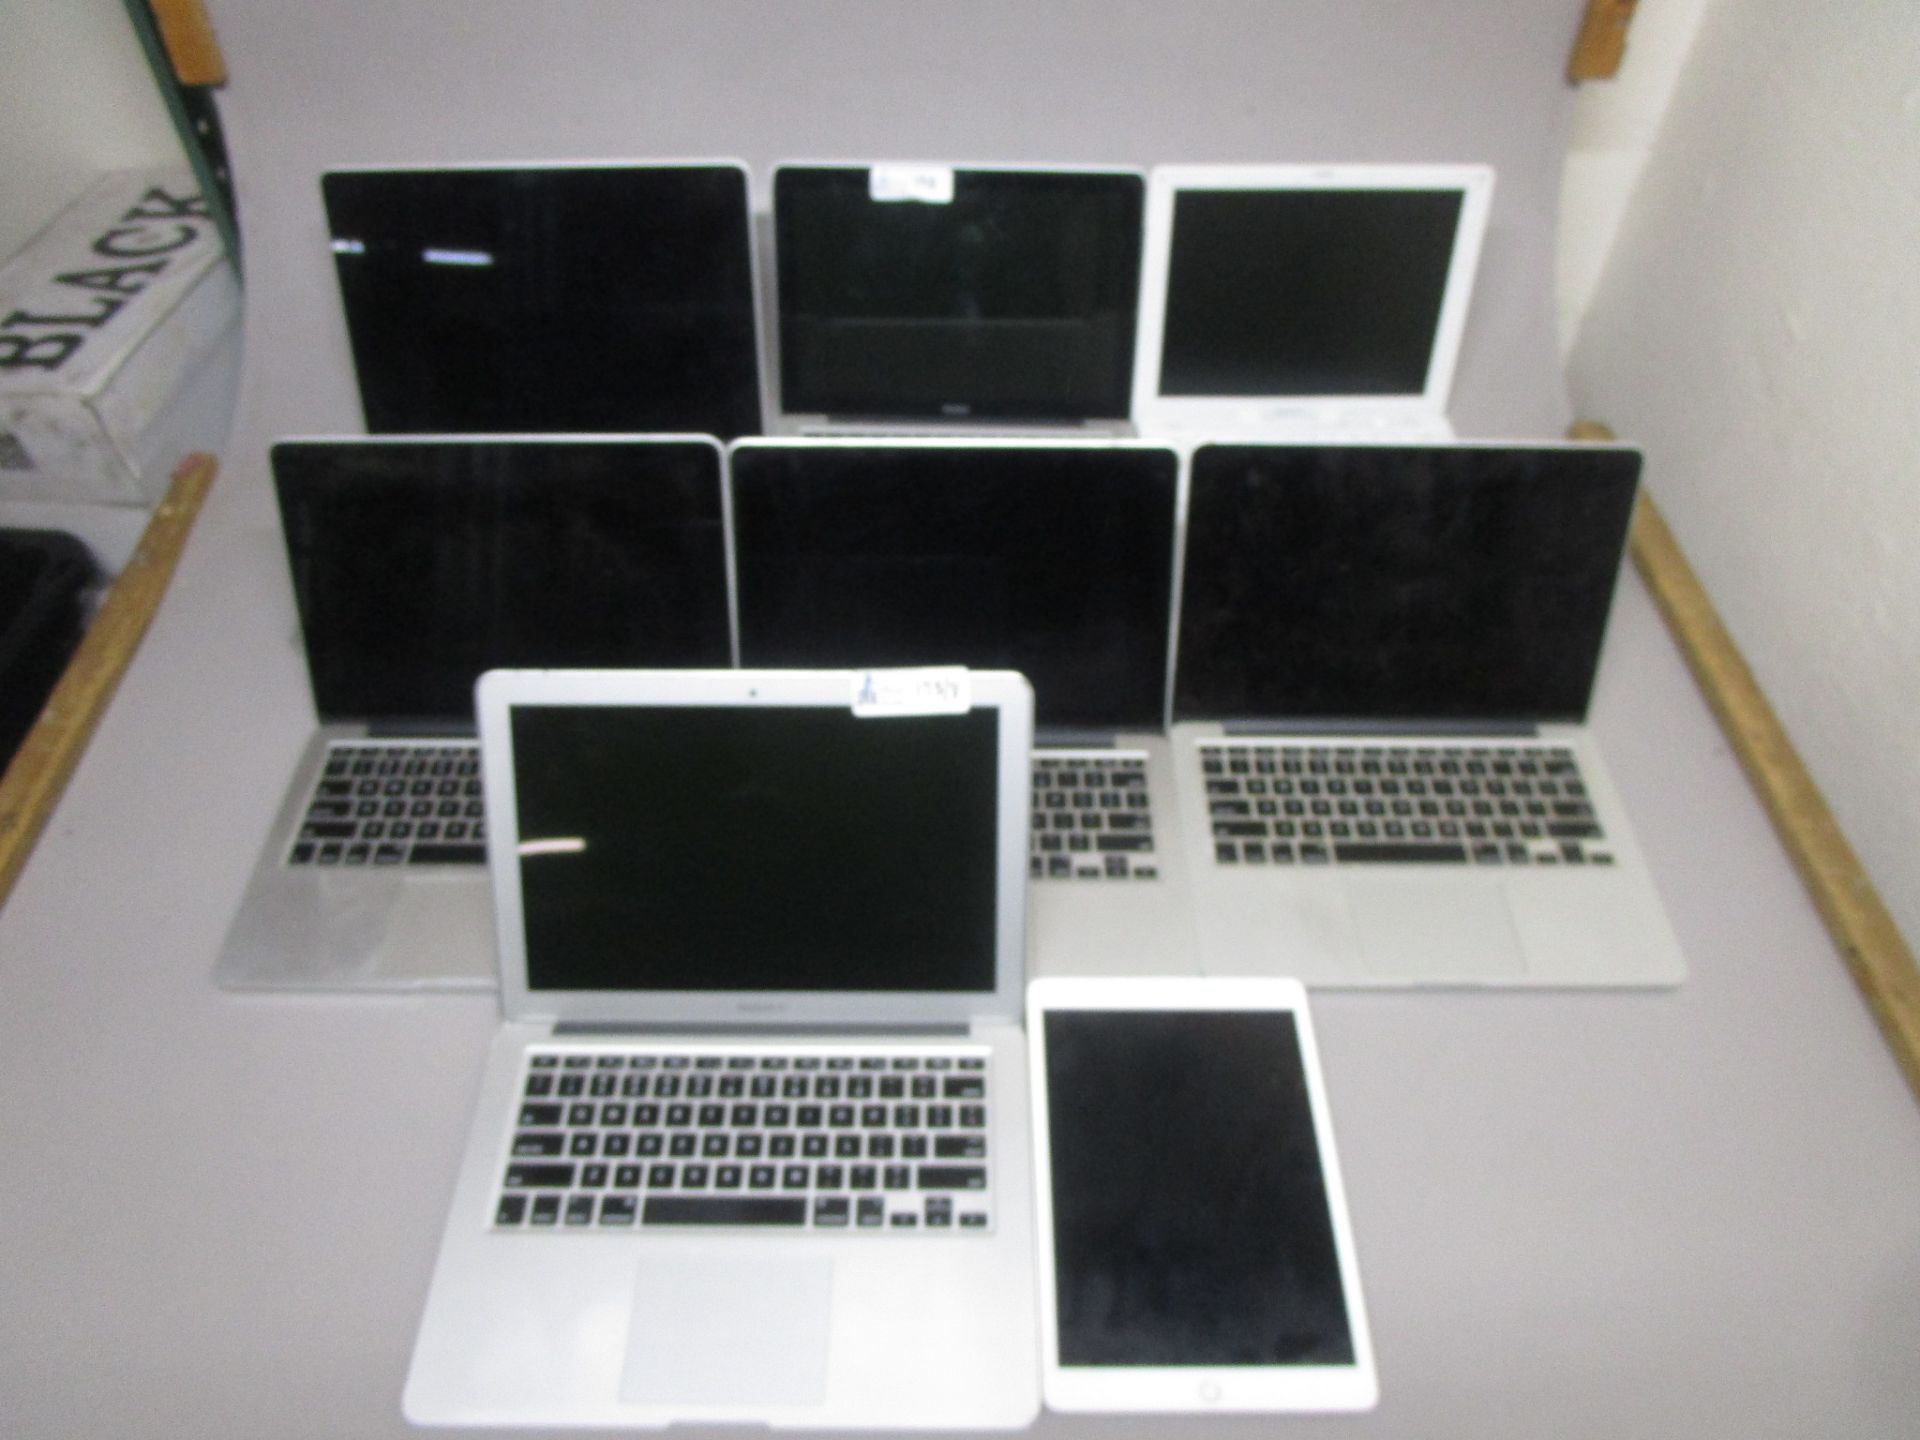 LOT OF 8 MAC LAPTOPS/TABLETS PARTS AND REPAIR